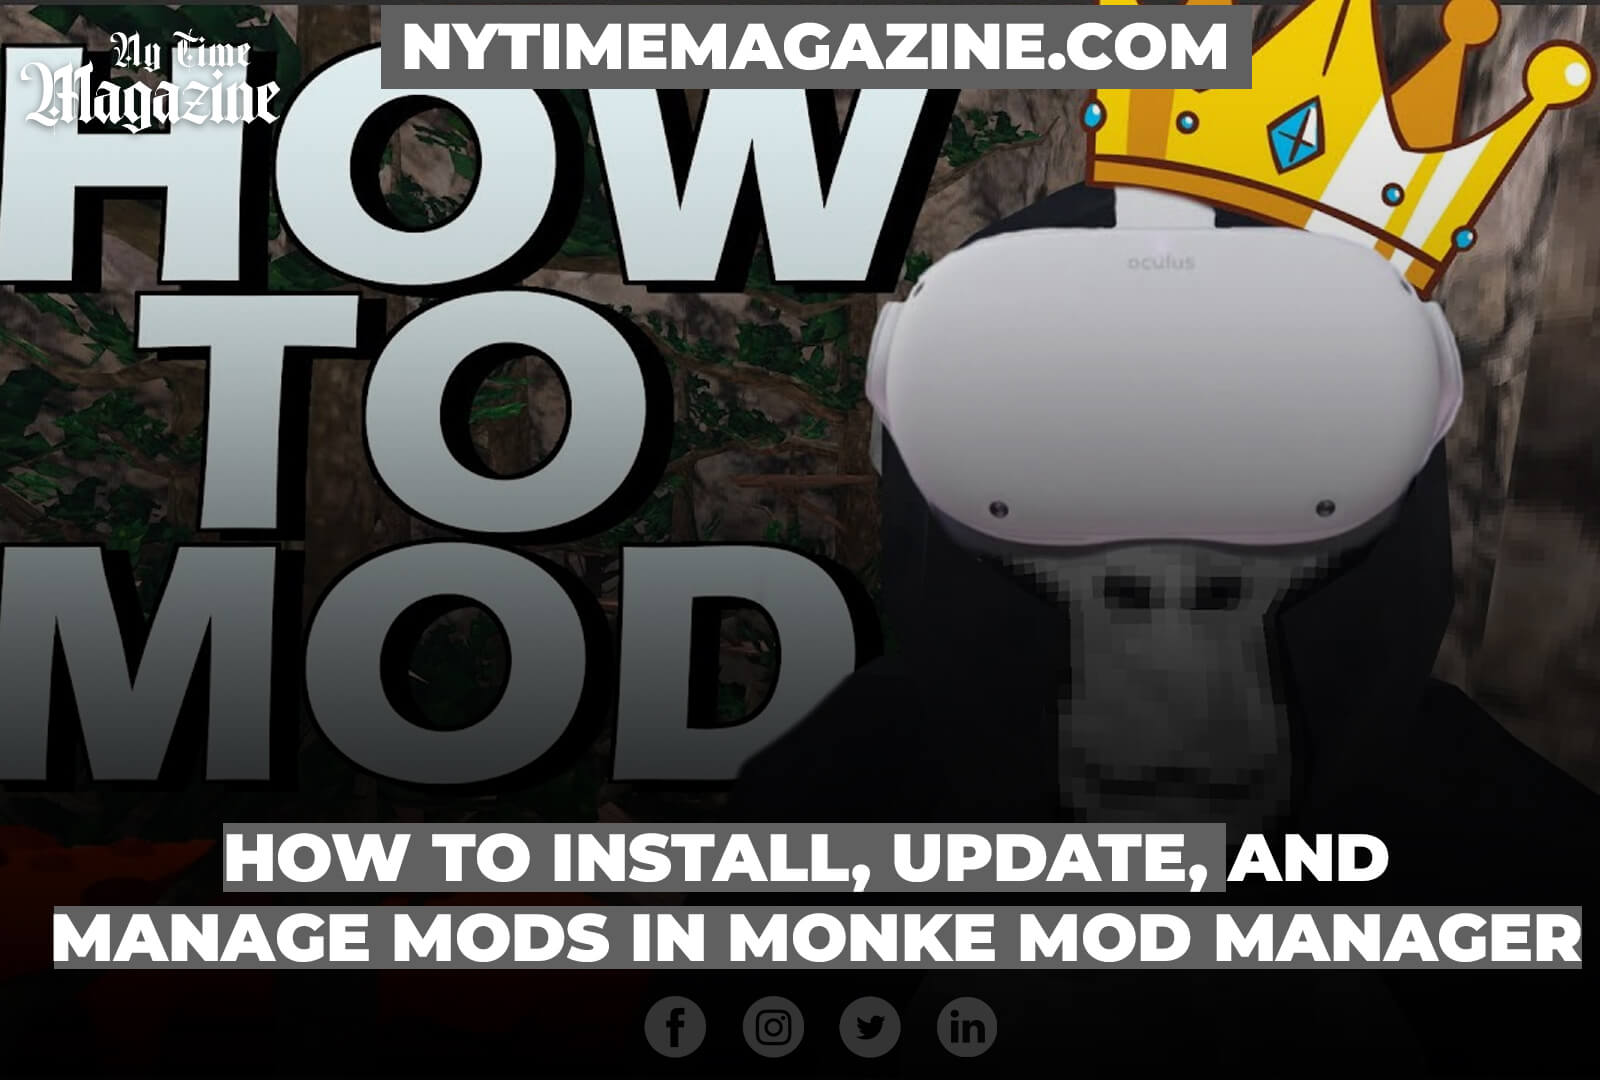 How to Install, Update, and Manage Mods in Monke Mod Manager